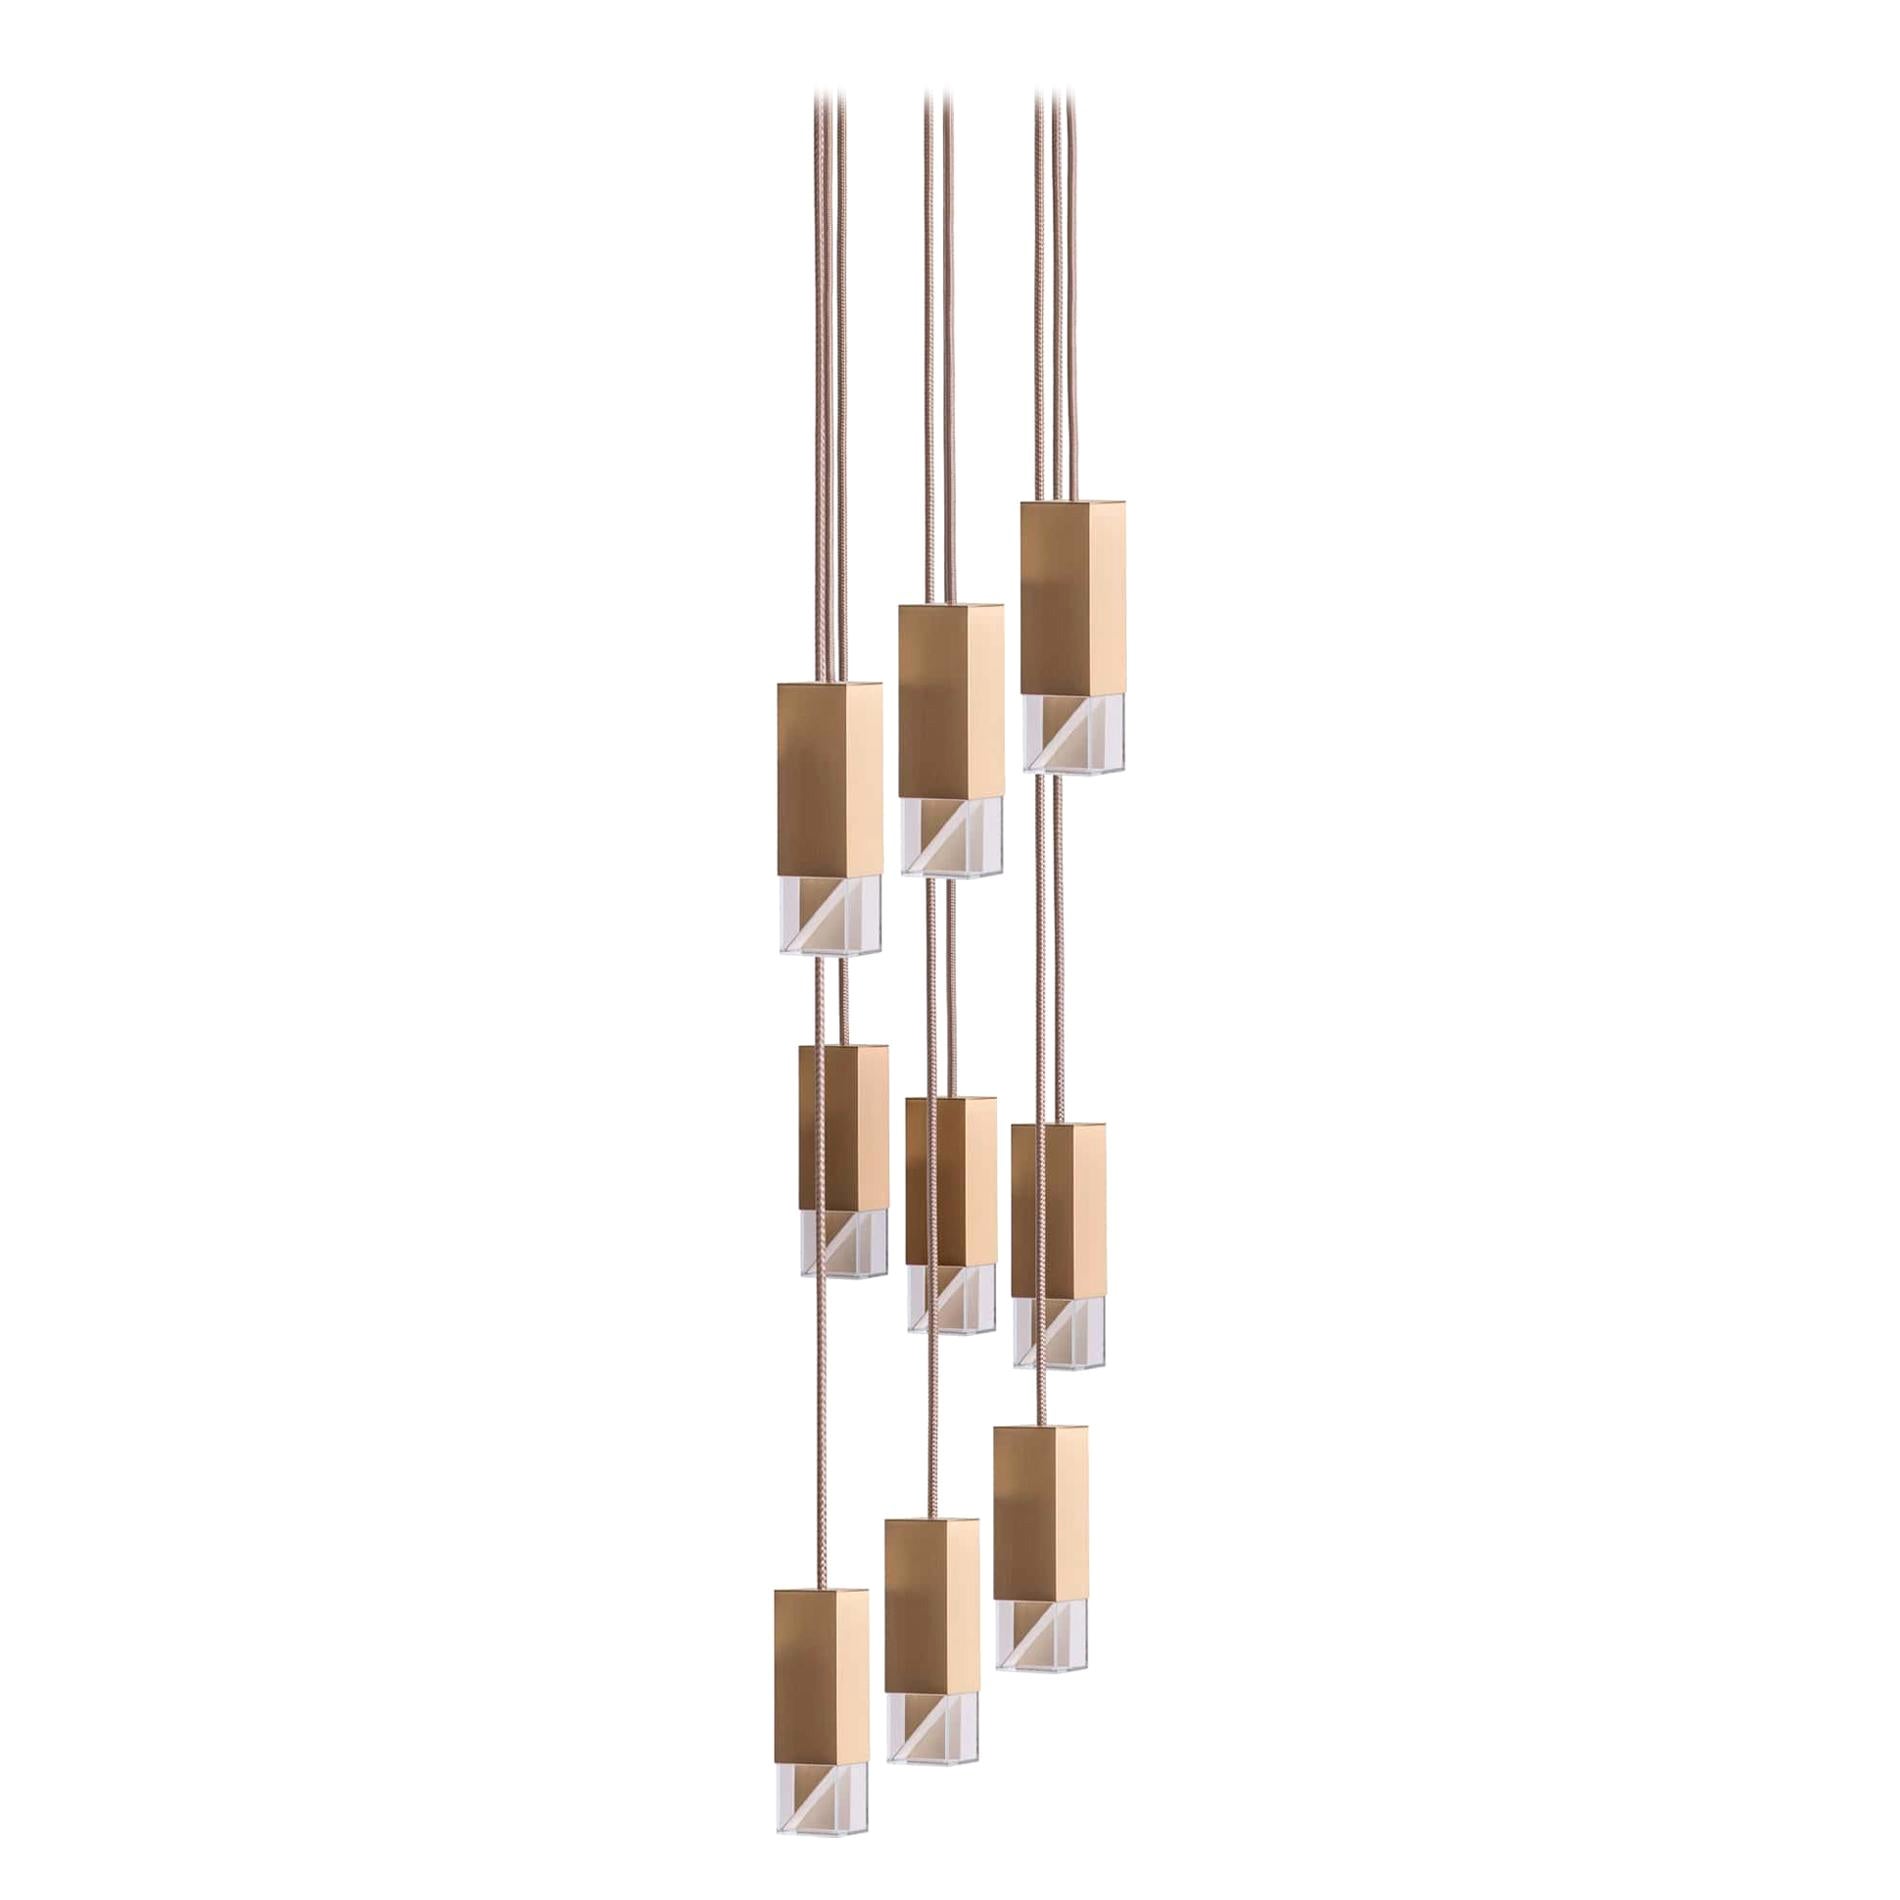 Lamp One 9-Light Chandelier in Brass by Formaminima